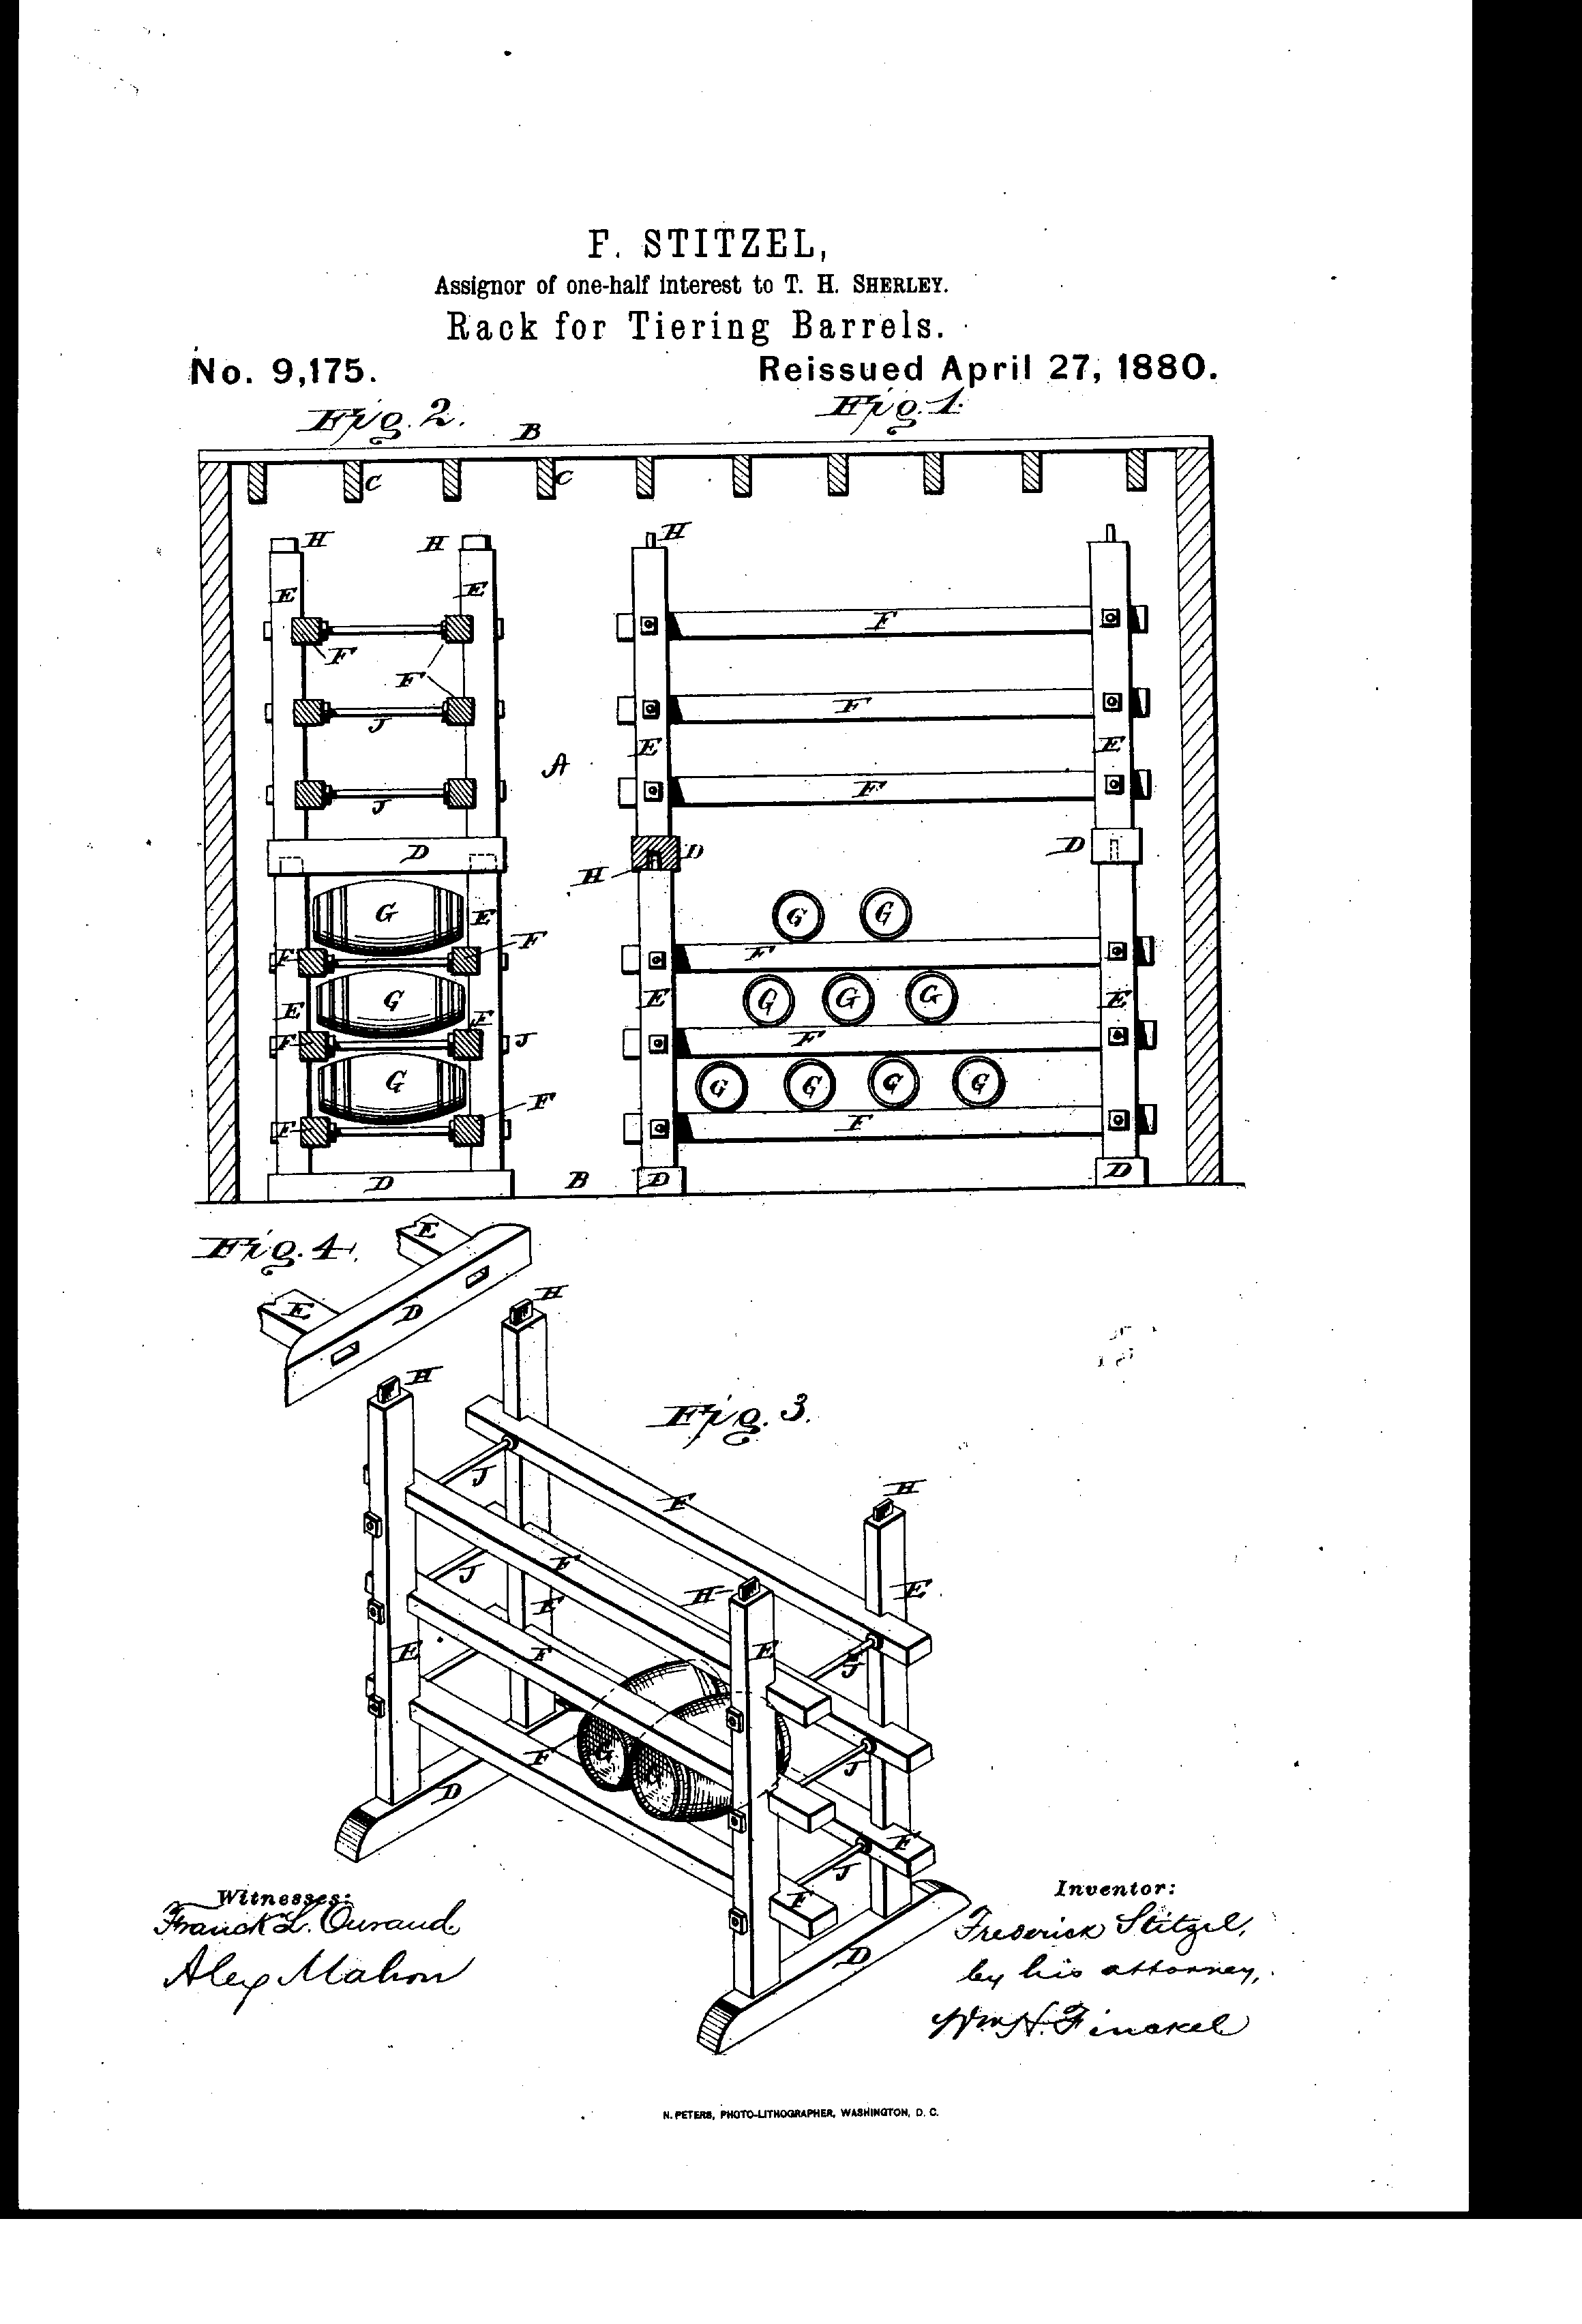 From the U.S. Patent Office 